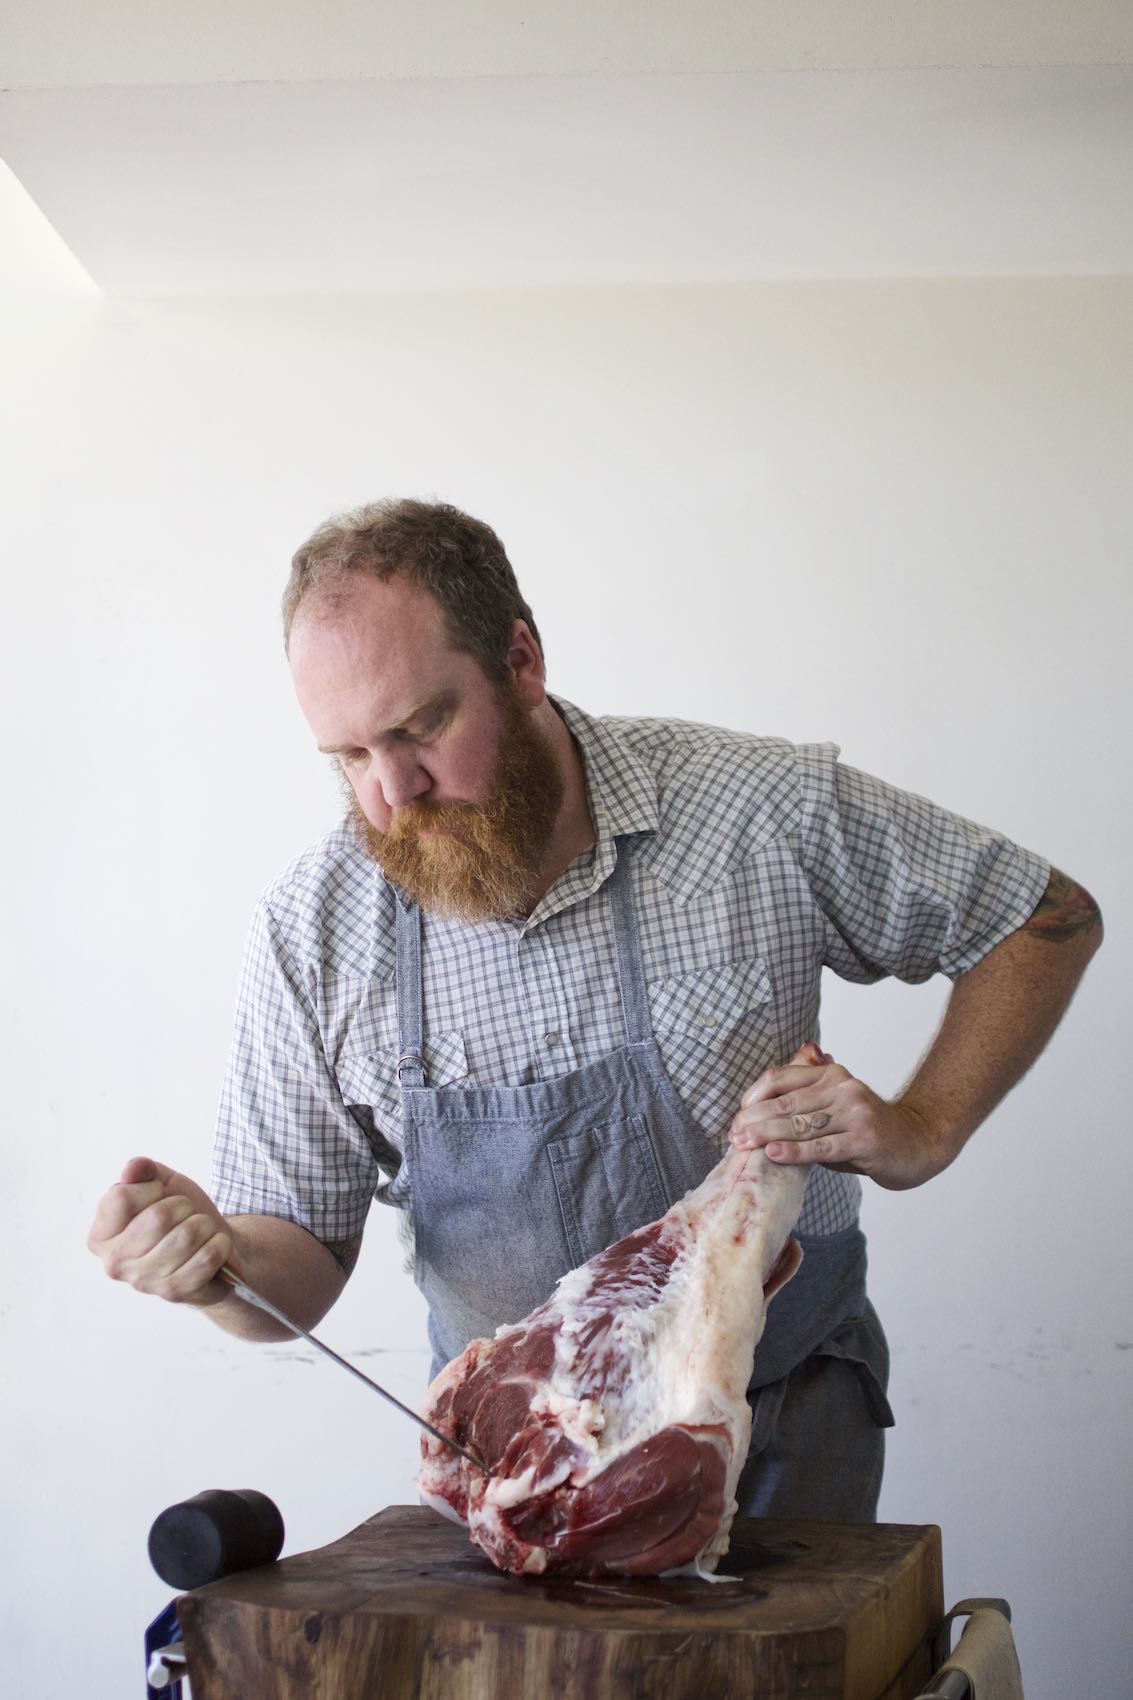 Jody Horton Photography - Dai Due chef carving leg of meat on a wood cutting board. 